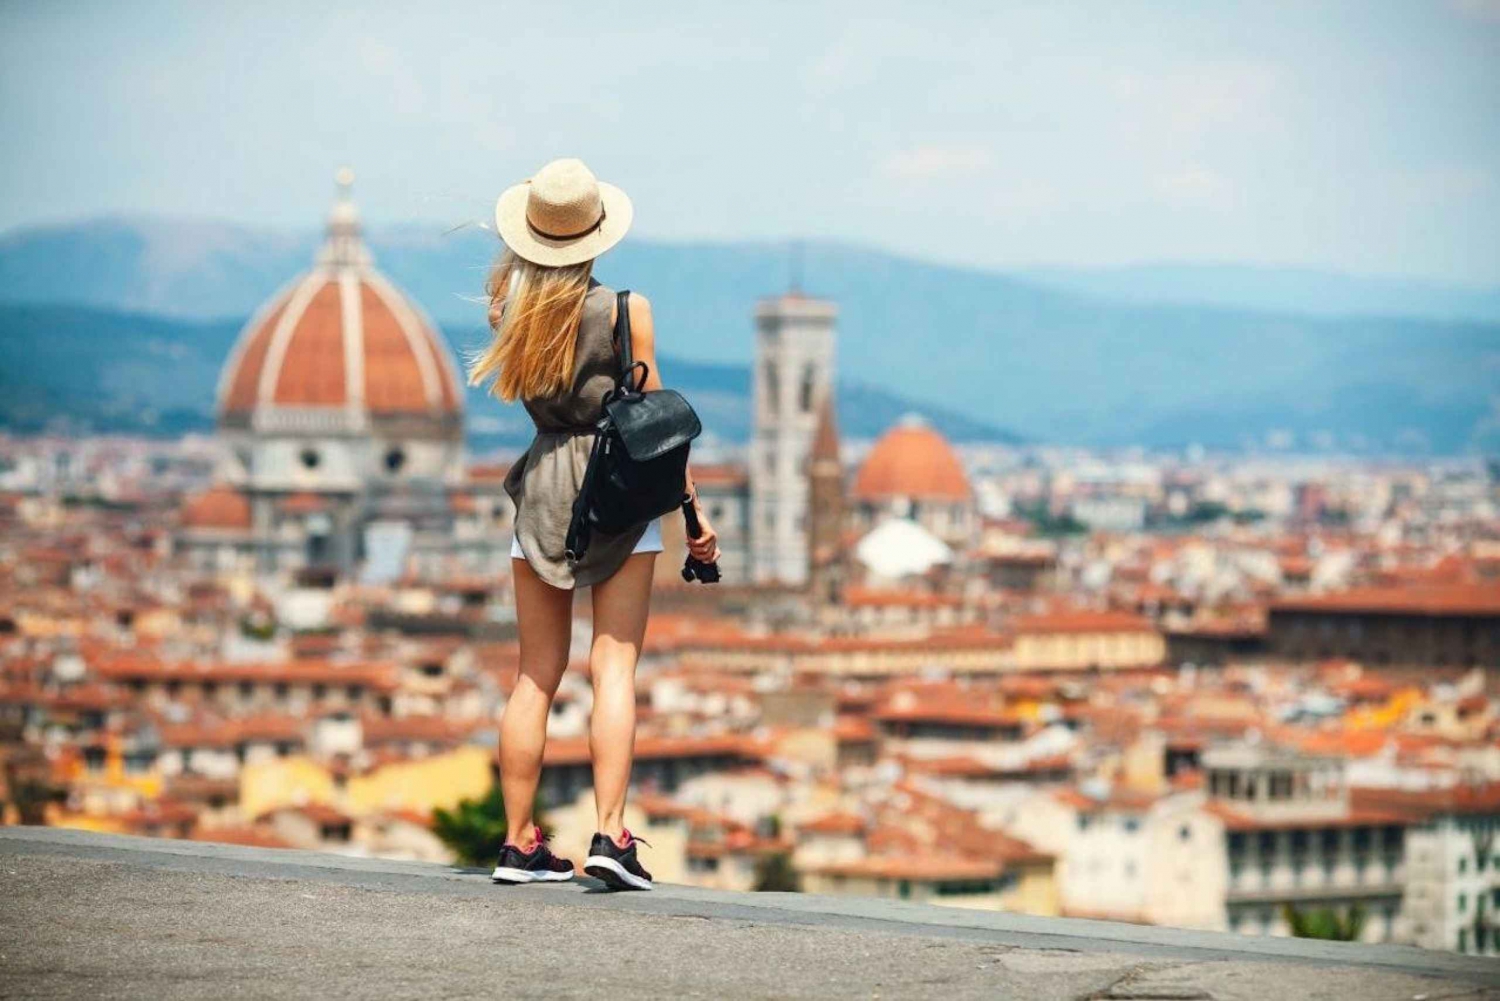 Essential Florence Walking Tour to discover its history